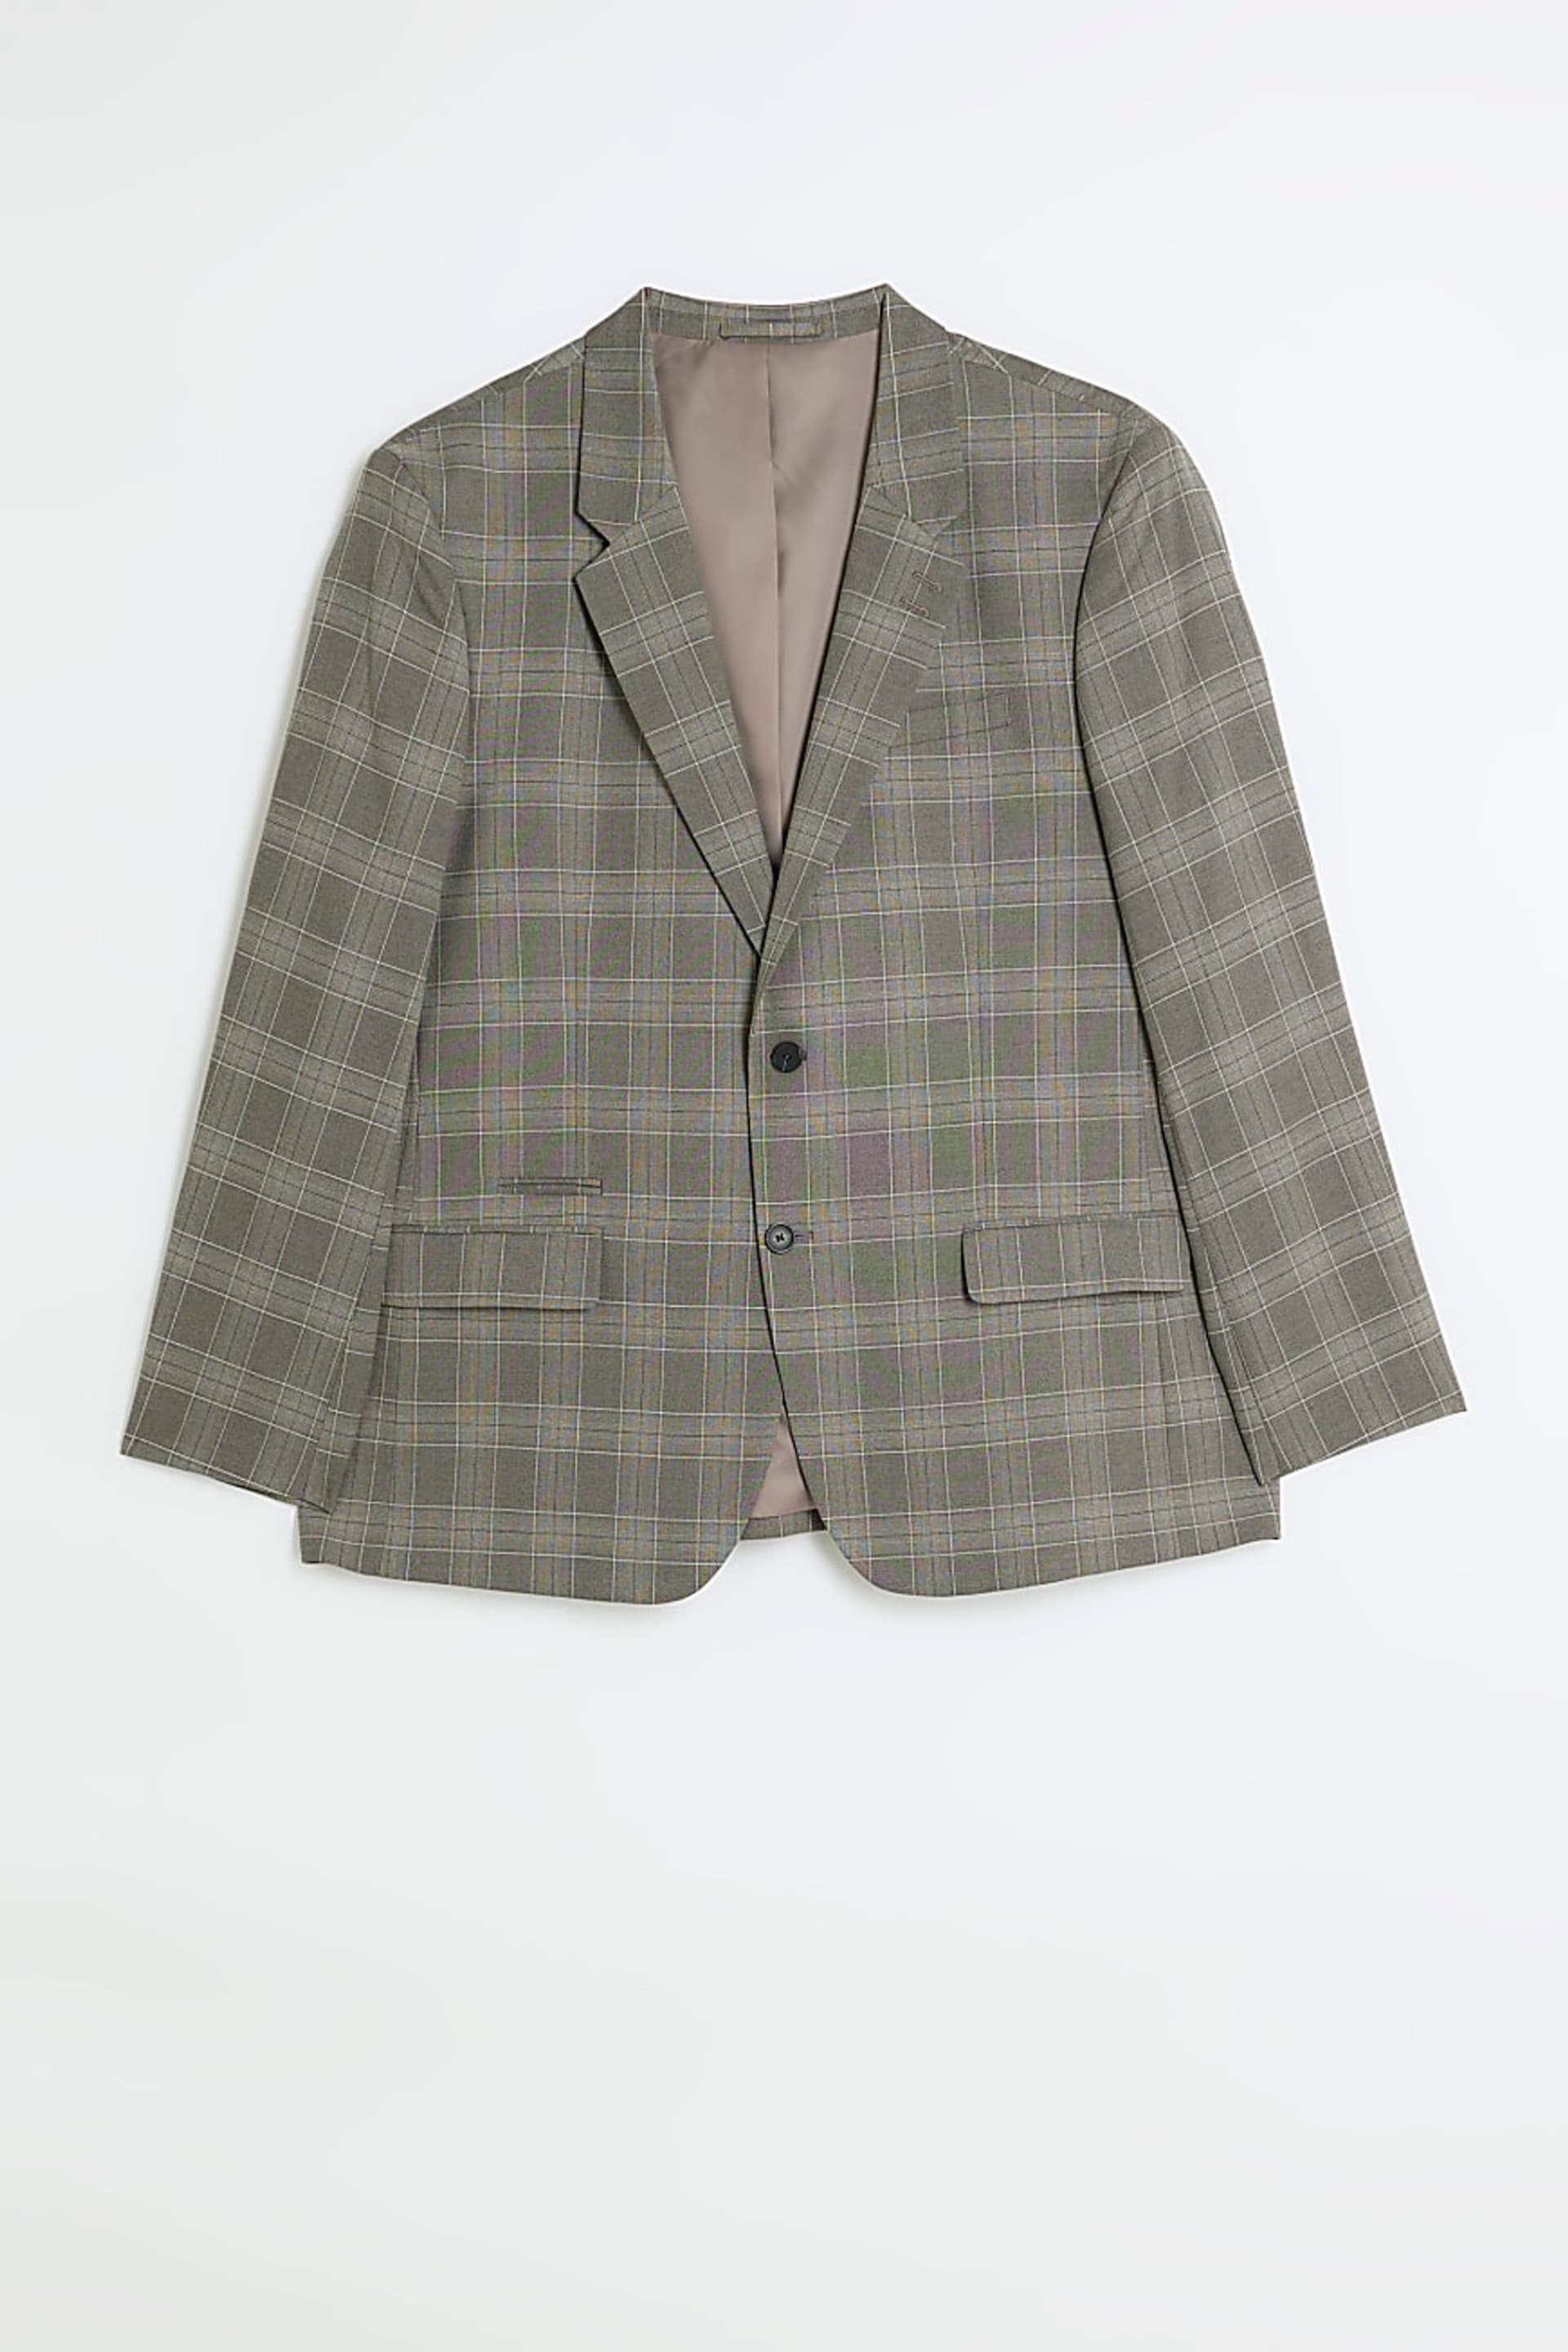 River Island Grey Big & Tall Notch Check Suit: Jacket - Image 5 of 6